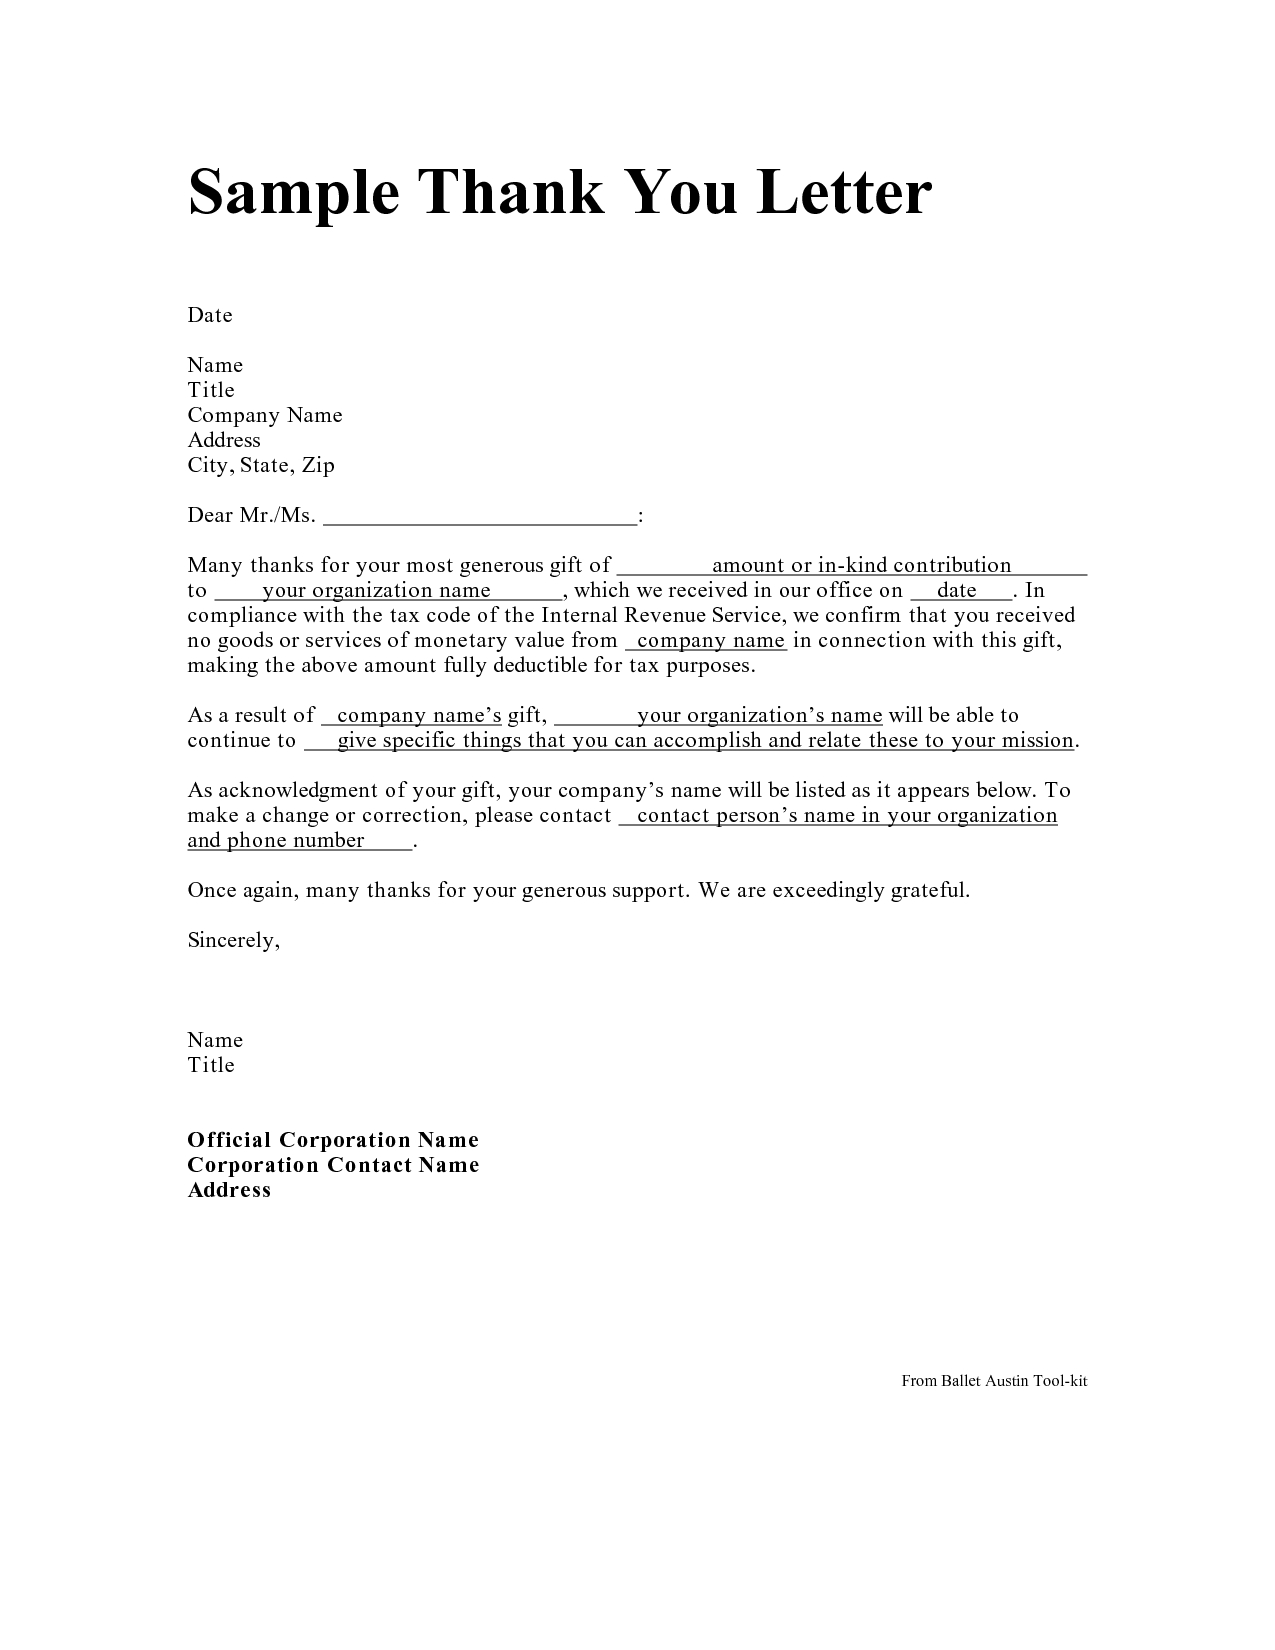 writing a formal letter template example-format of thank you letter 4-b